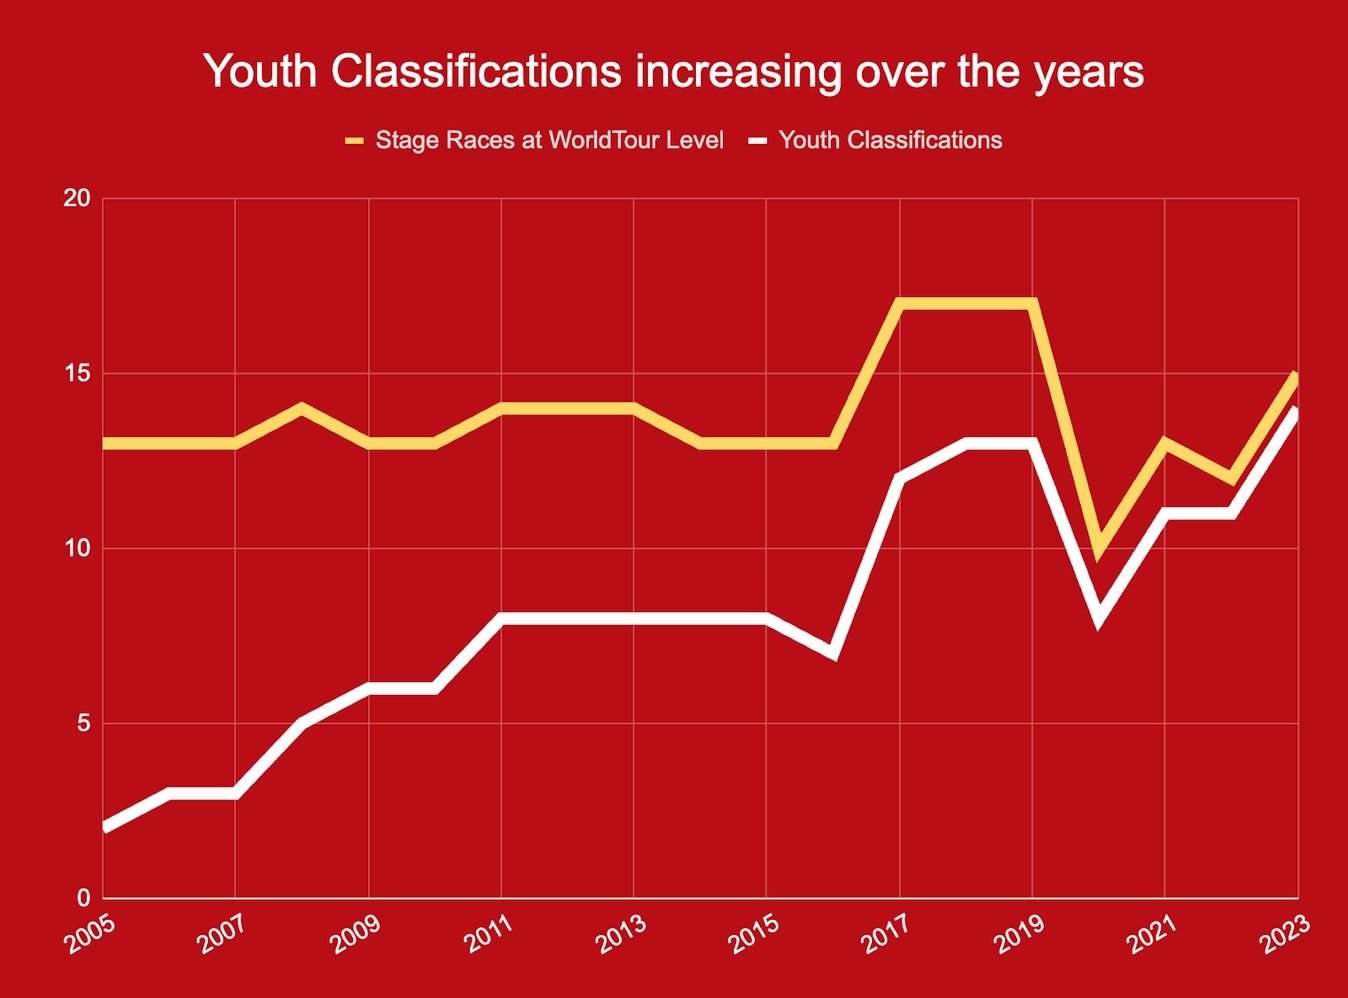 The presence of young rider classifications has been steadily growing over the years